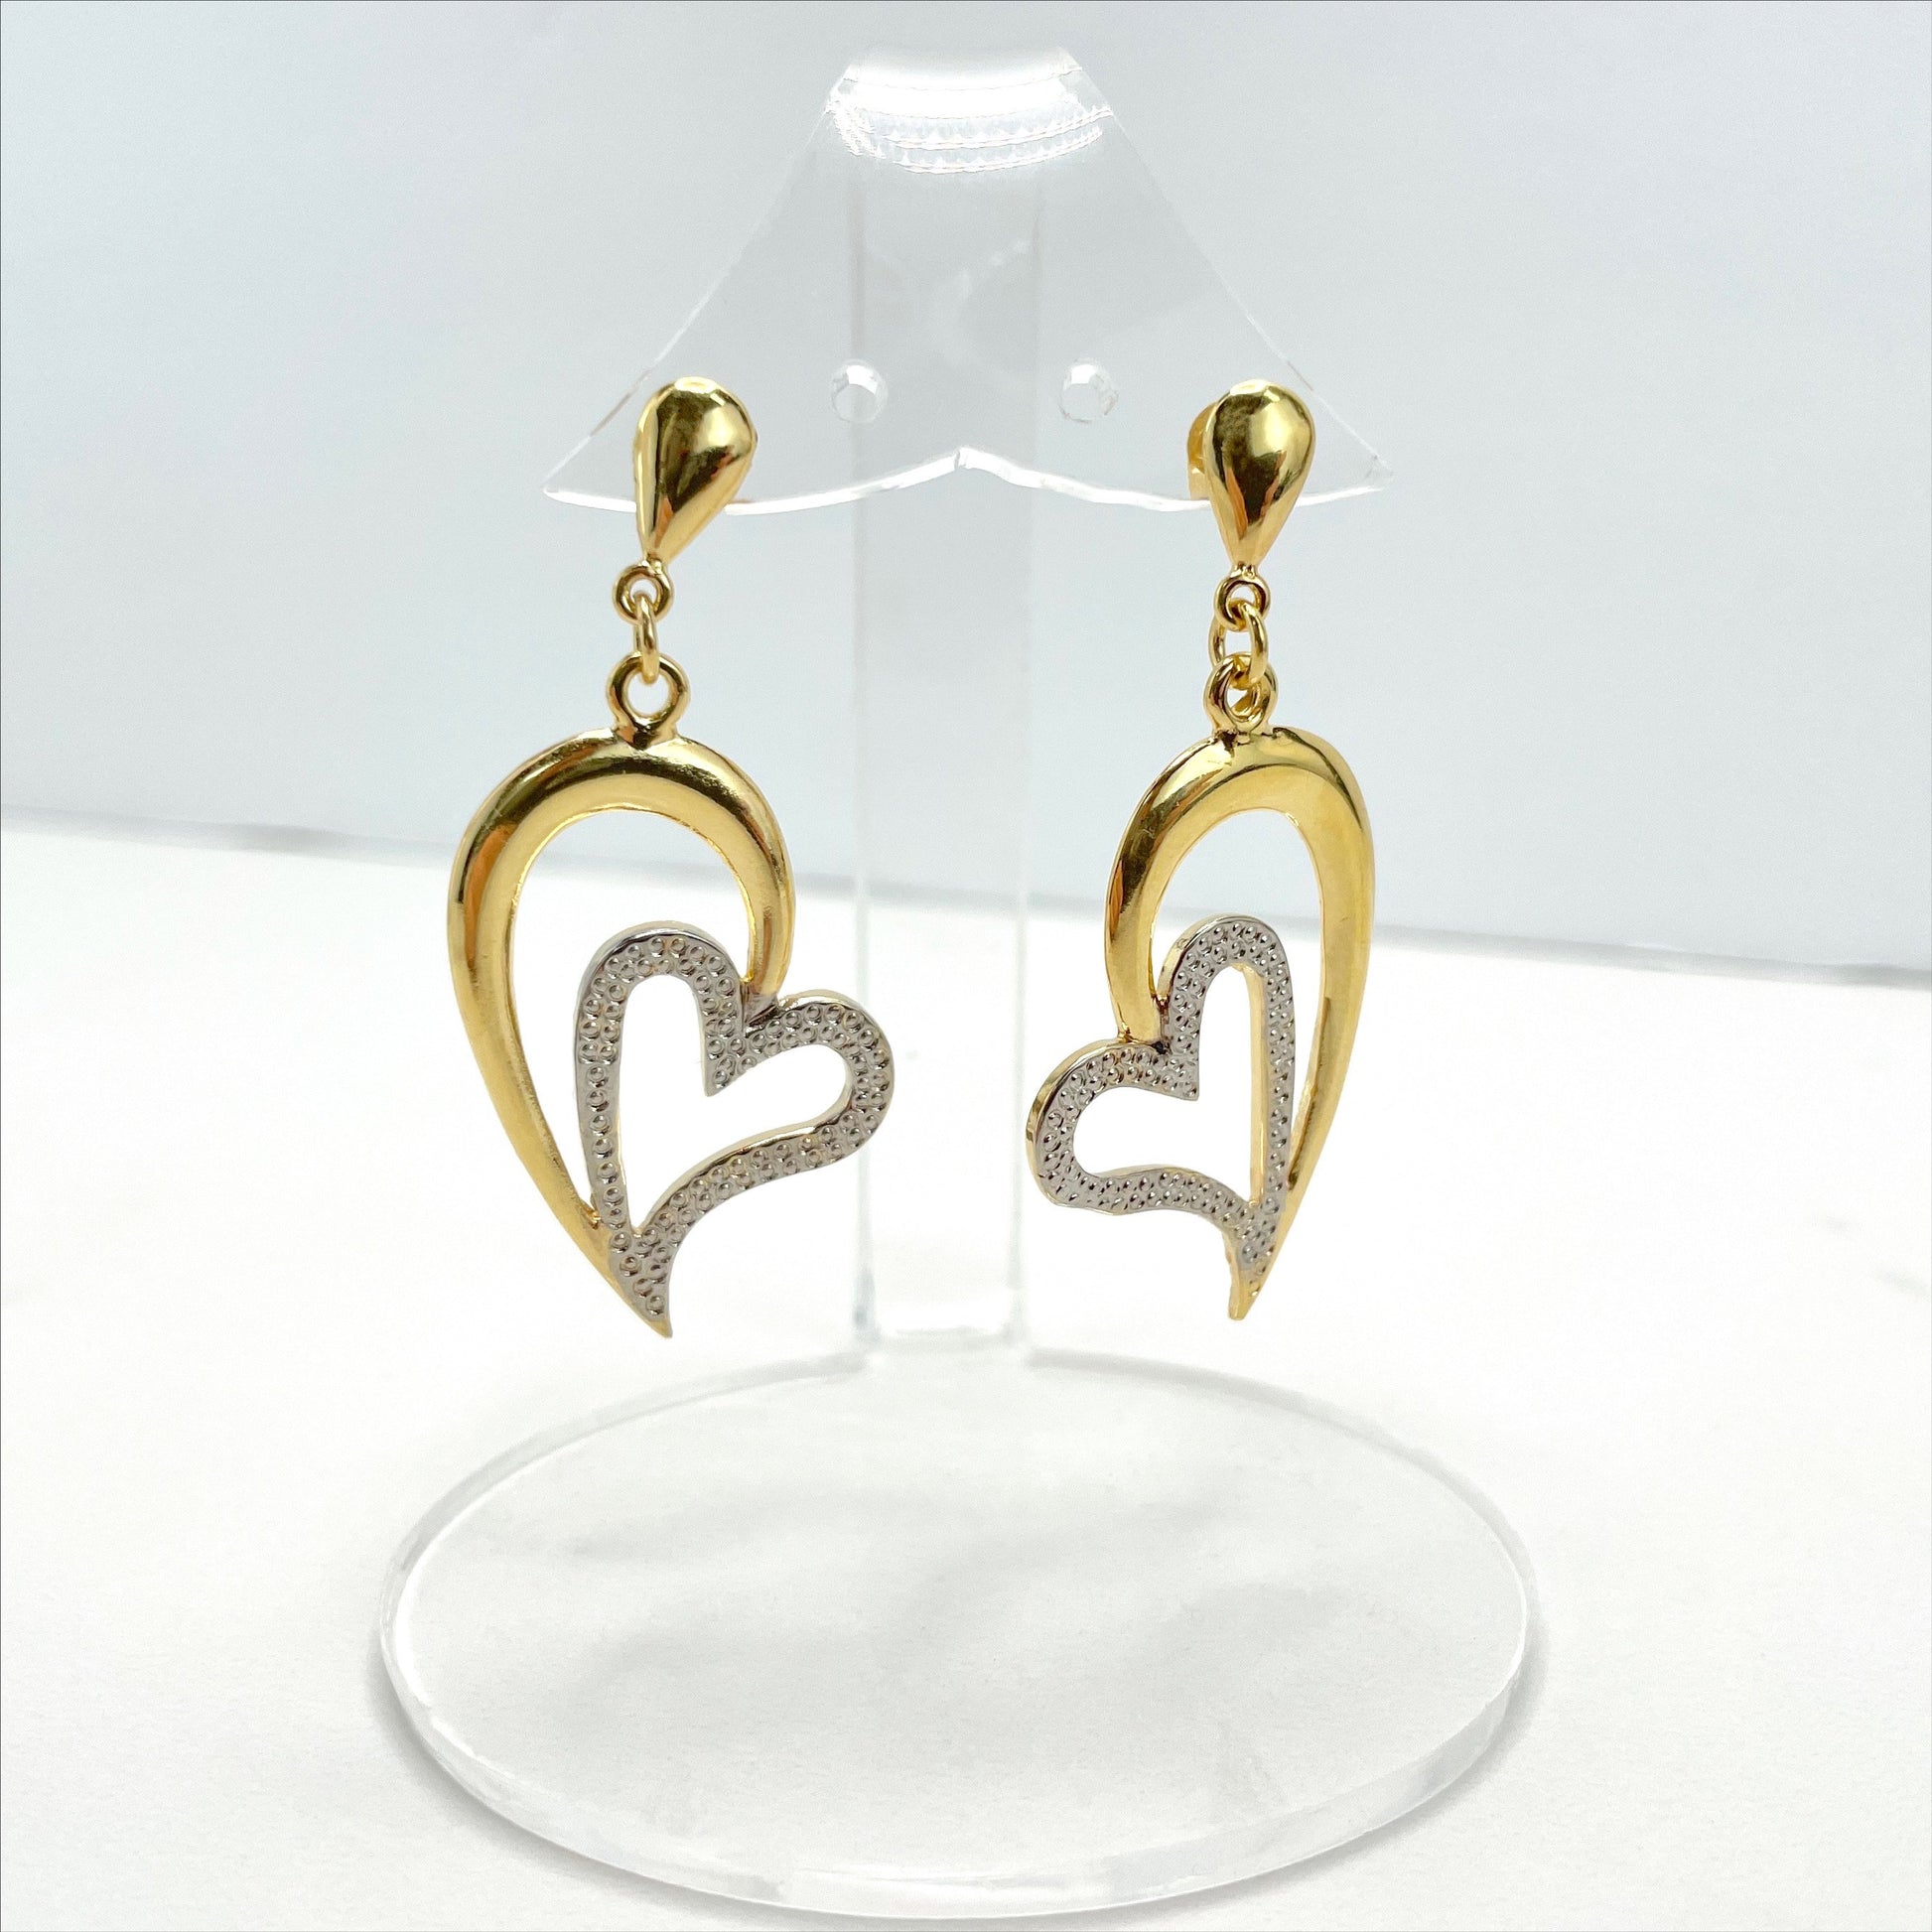 18k Gold Filled Two Tone Double Hearts Shape Design, Plain and Texturized, Drop Dangle Earrings, Wholesale Jewelry Making Supplies